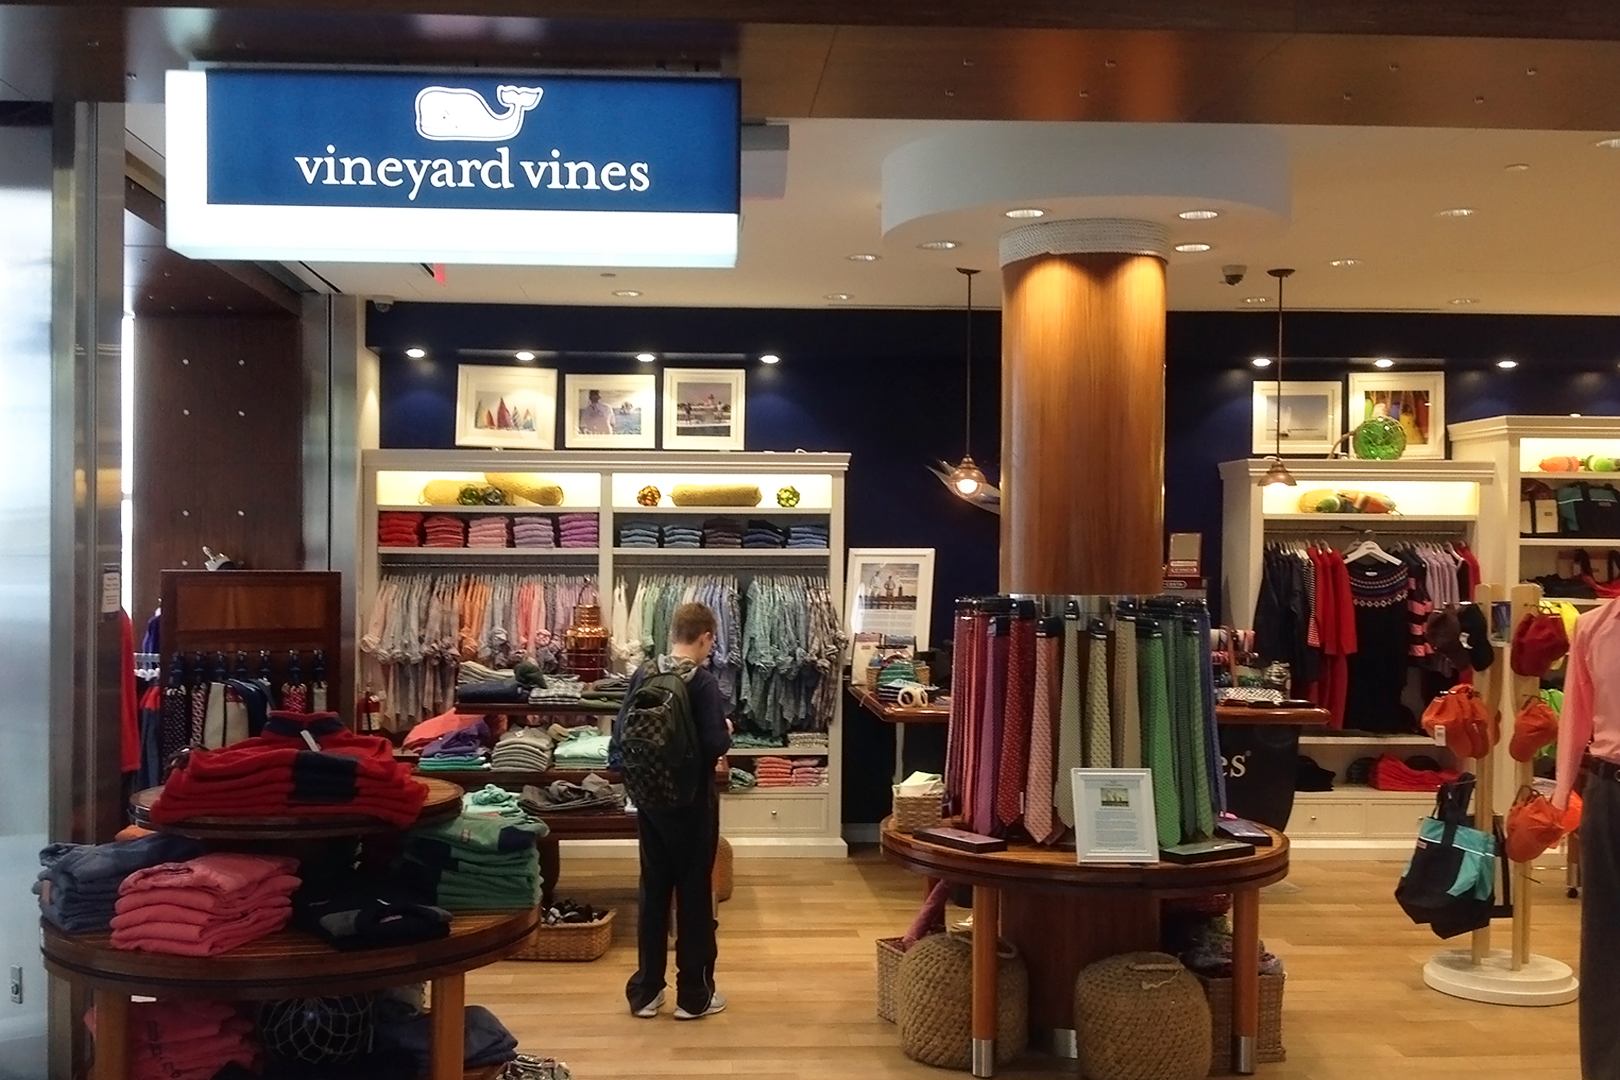 Wide view, free standing apparel displays fill the space, wall displays in the background.